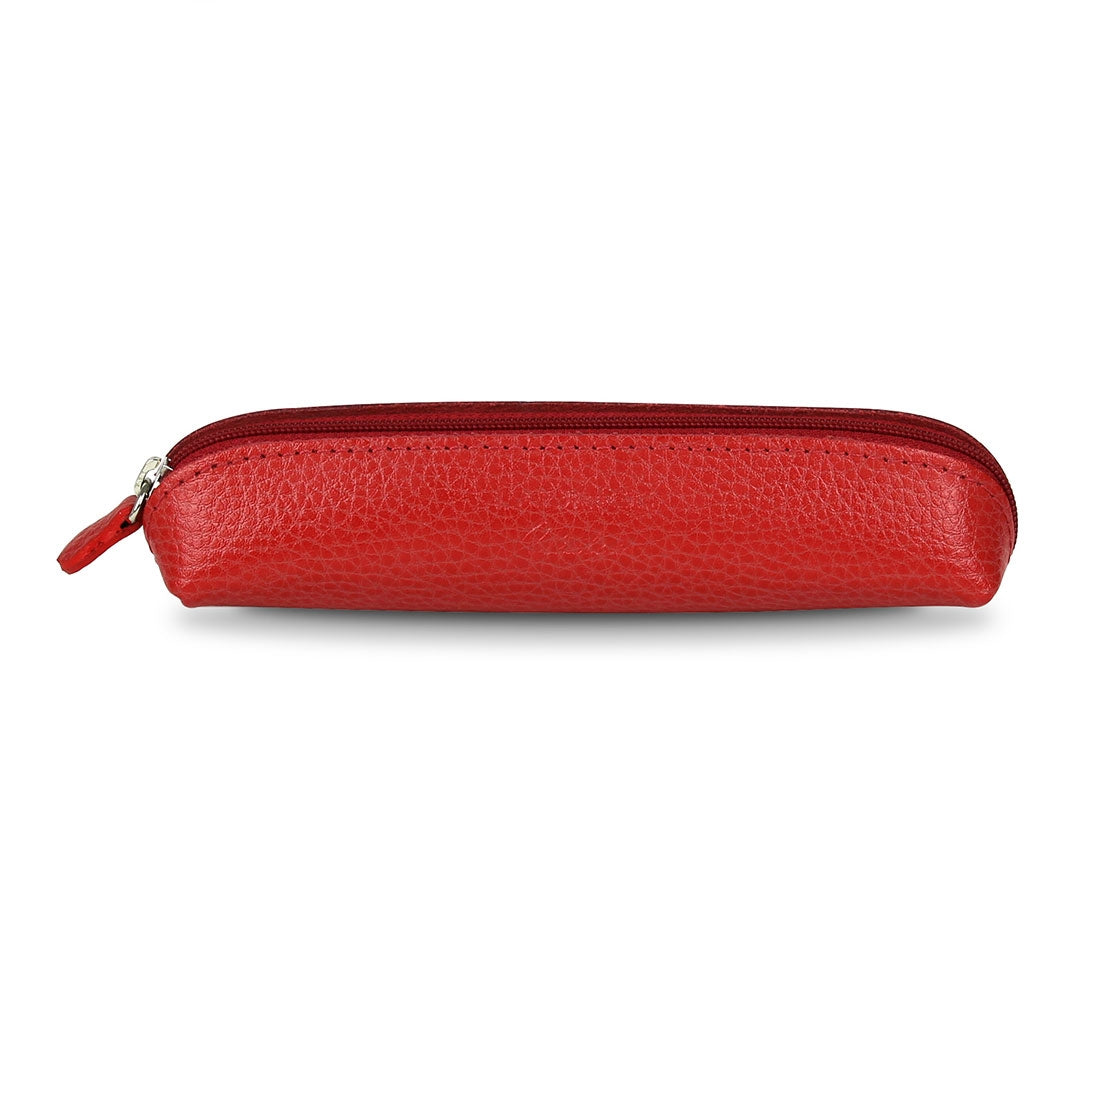 Small Pen Holder - Red#colour_laurige-red